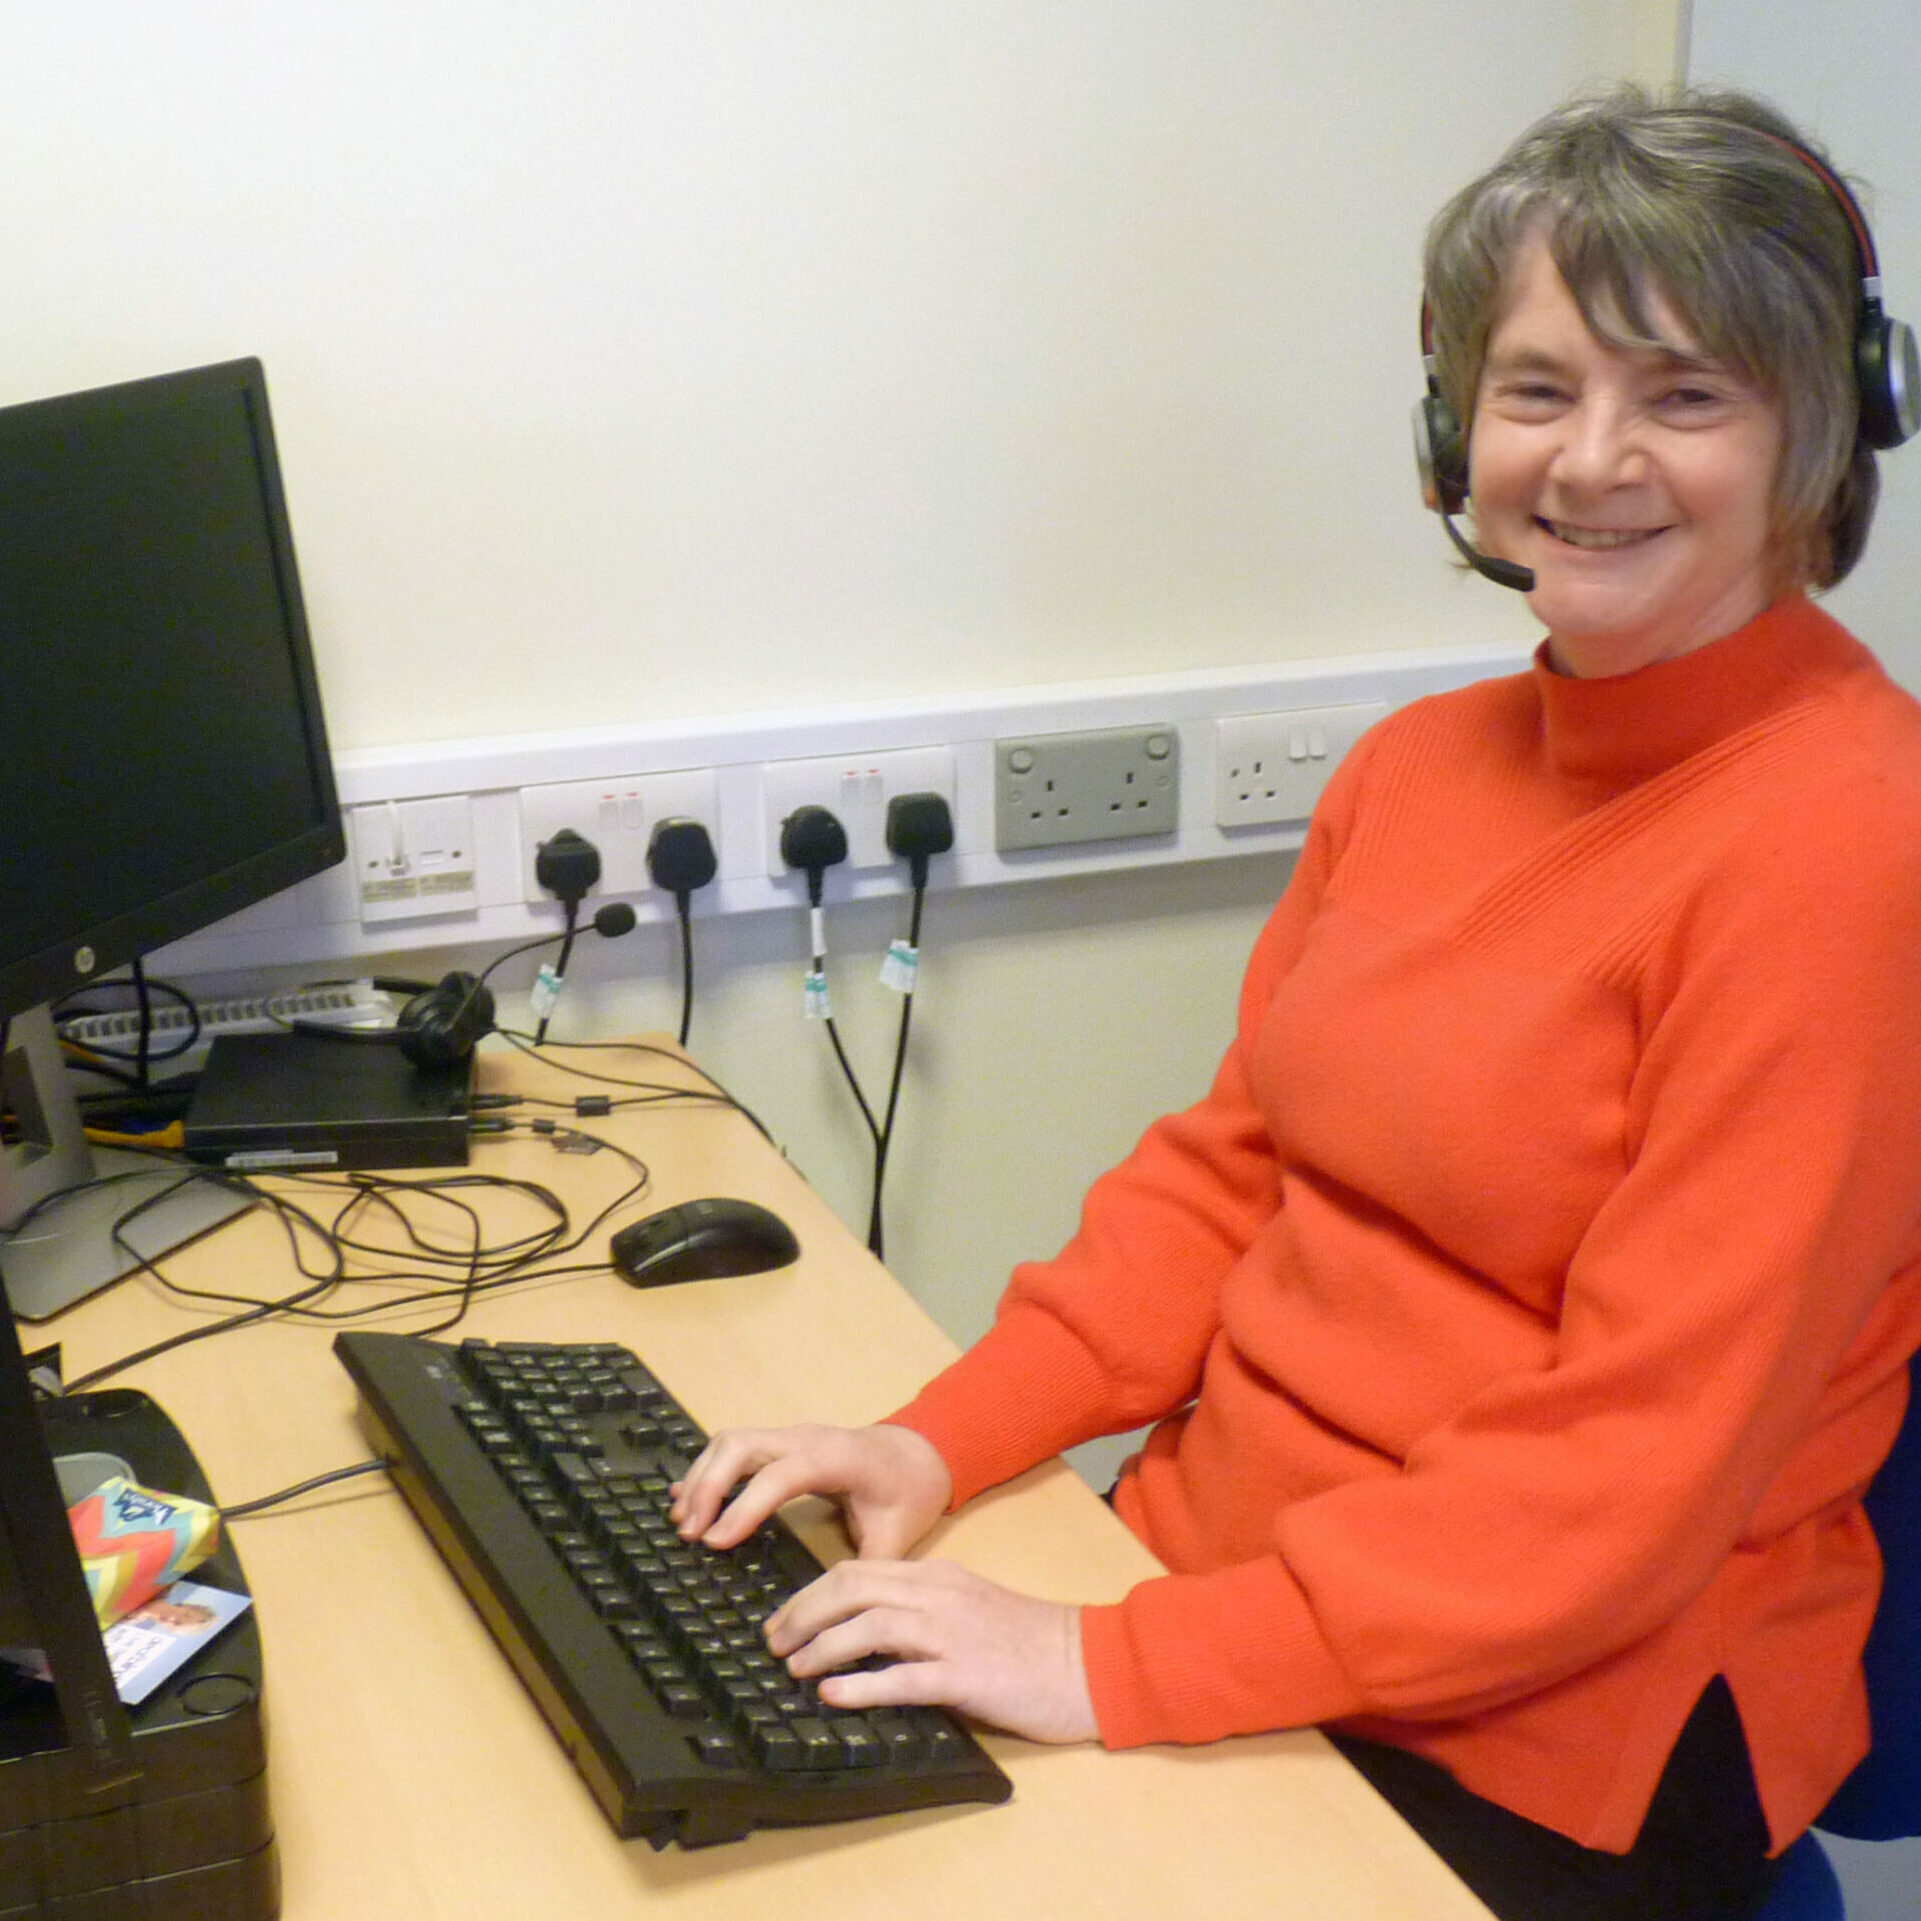 Lyn at the Deafblind UK office. She has a headset on and is using her computer.